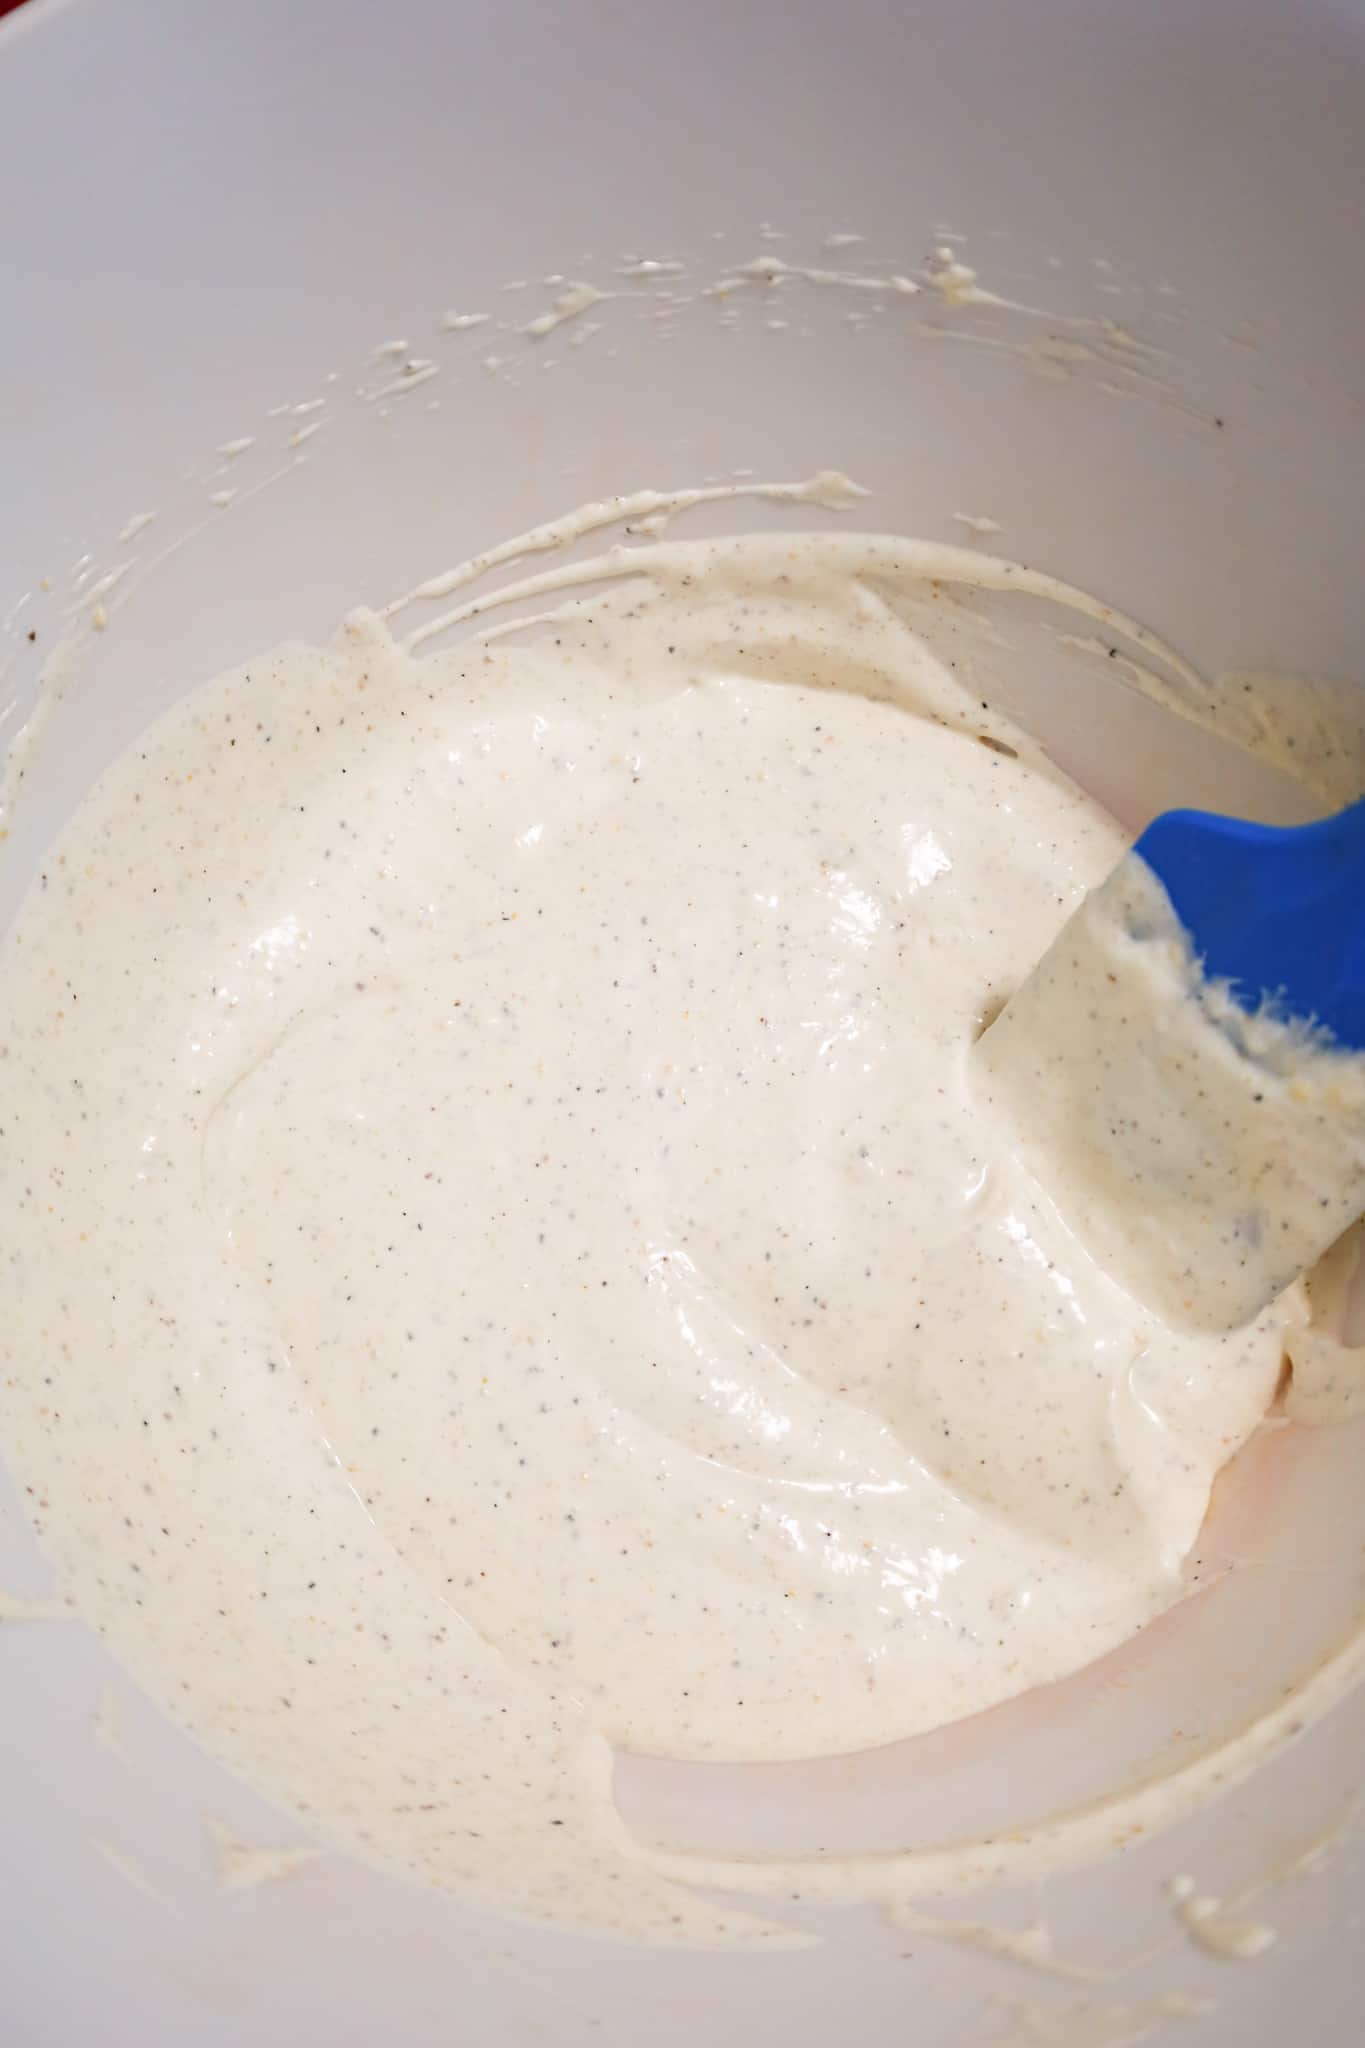 sour cream and mayo mixture in a mixing bowl